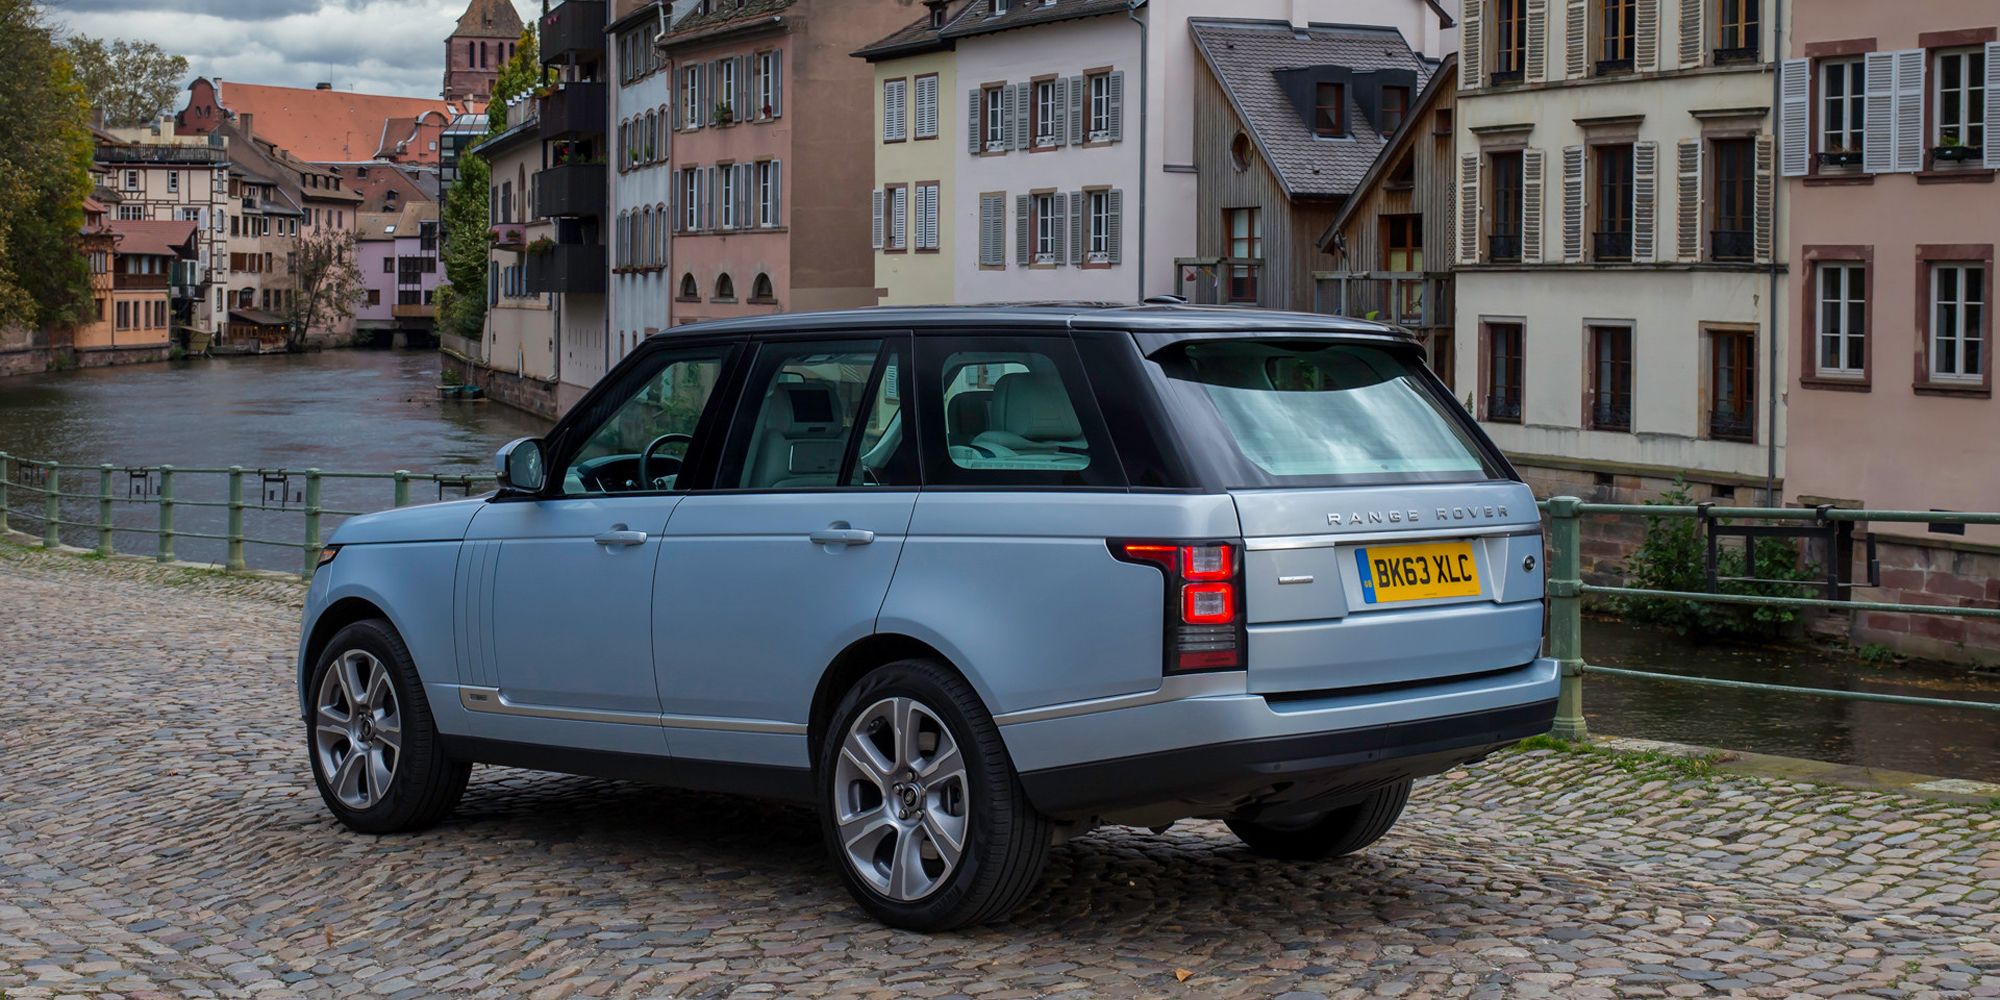 The rear of the Range Rover